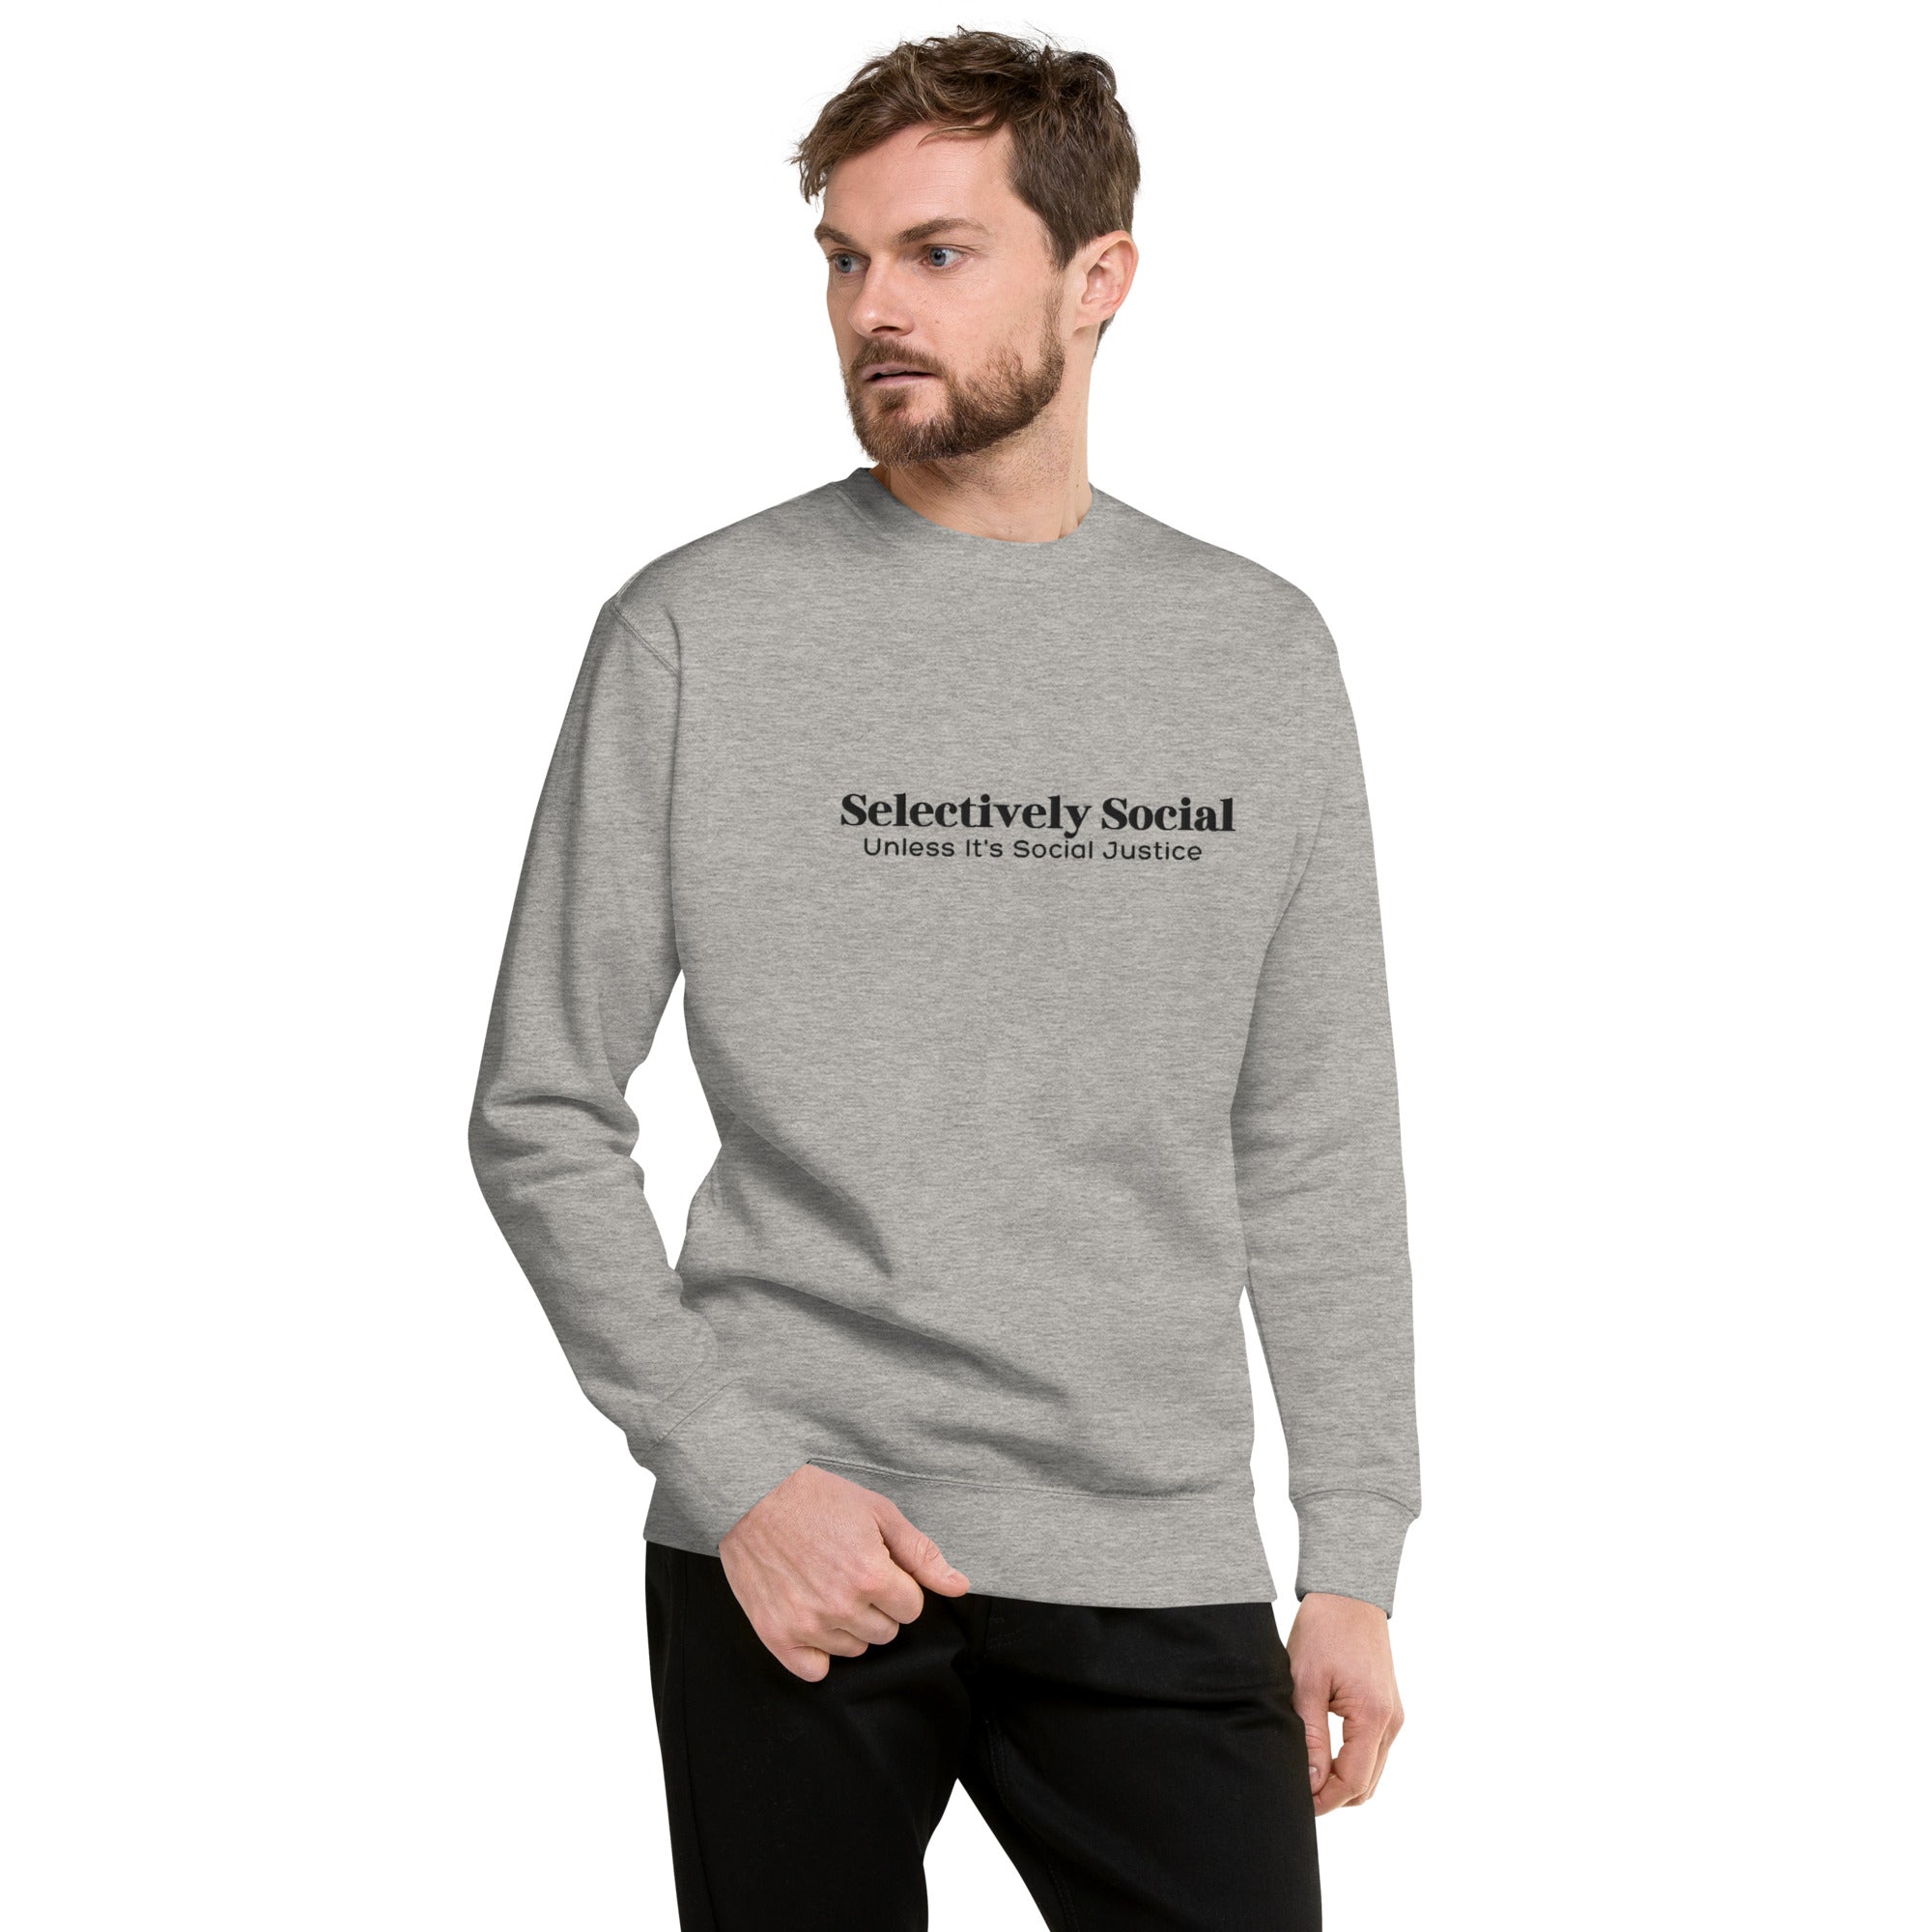 Selectively Social Black Embroidered Unisex Premium Sweatshirt - The Kindness Cause